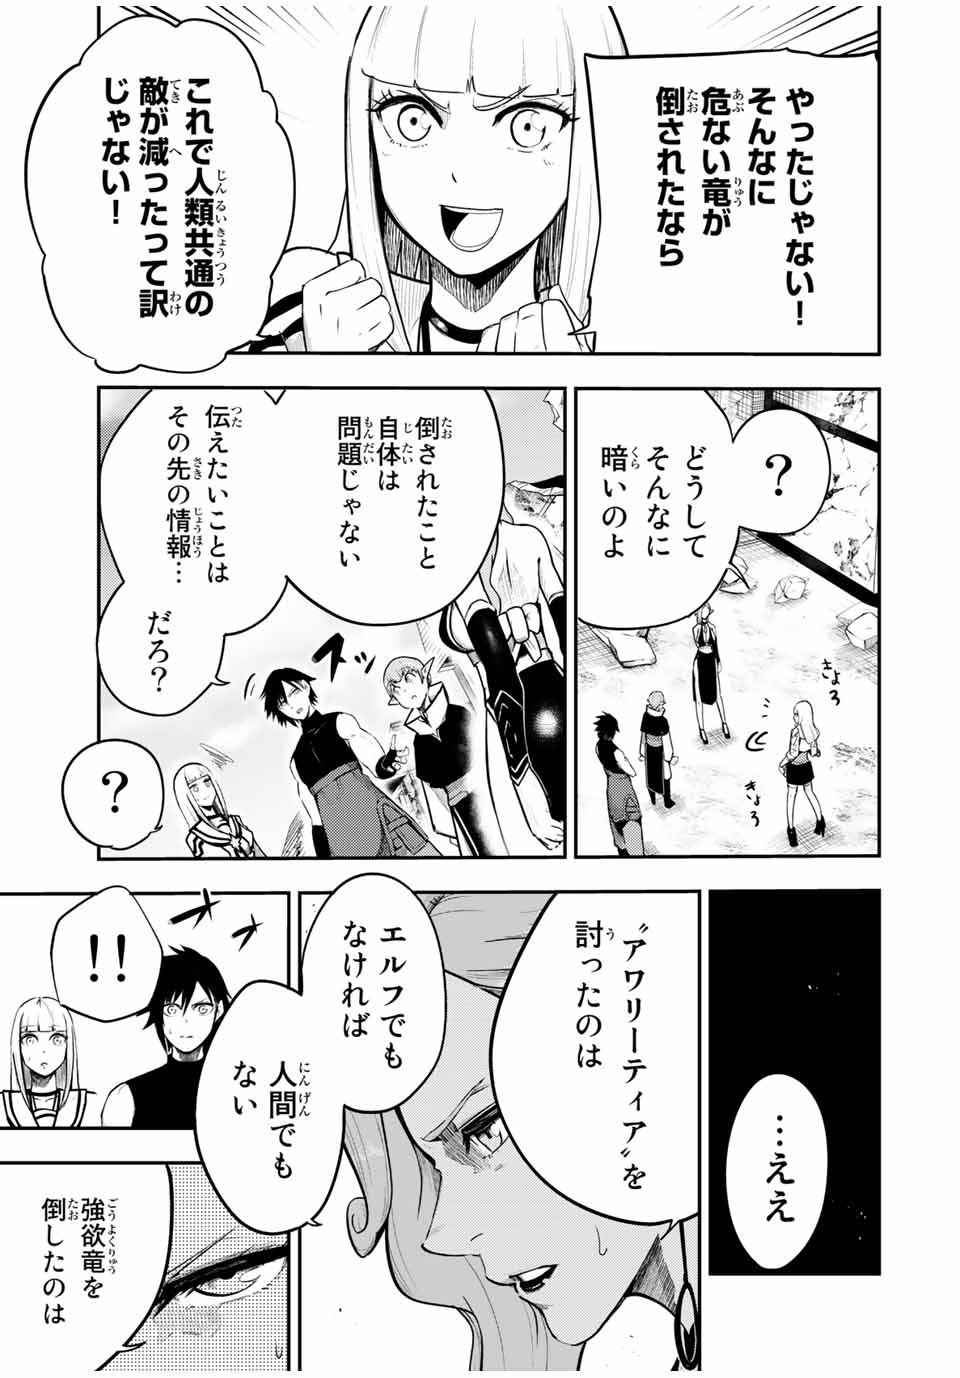 the strongest former prince-; 奴隷転生 ～その奴隷、最強の元王子につき～ 第50話 - Page 19